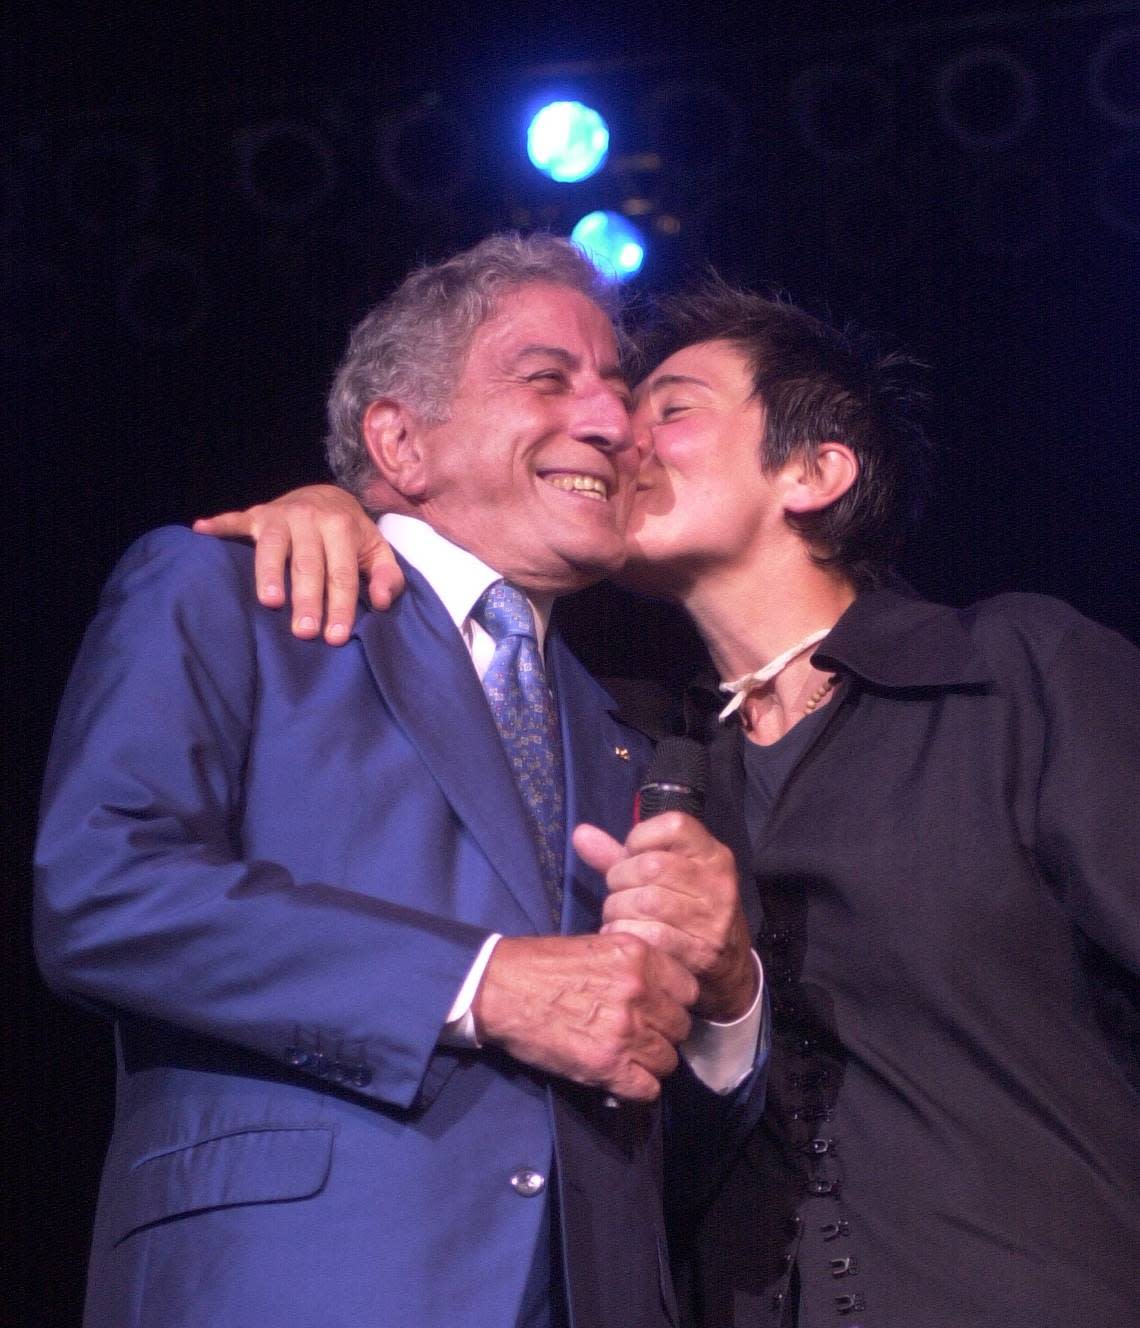 Tony Bennett gets a surprise kiss from k.d. lang before she started singing segment at their concert at Raleigh’s Walnut Creek Pavillion Sunday Aug. 5, 2001. SUSANA VERA/NEWS & OBSERVER FILE PHOTO